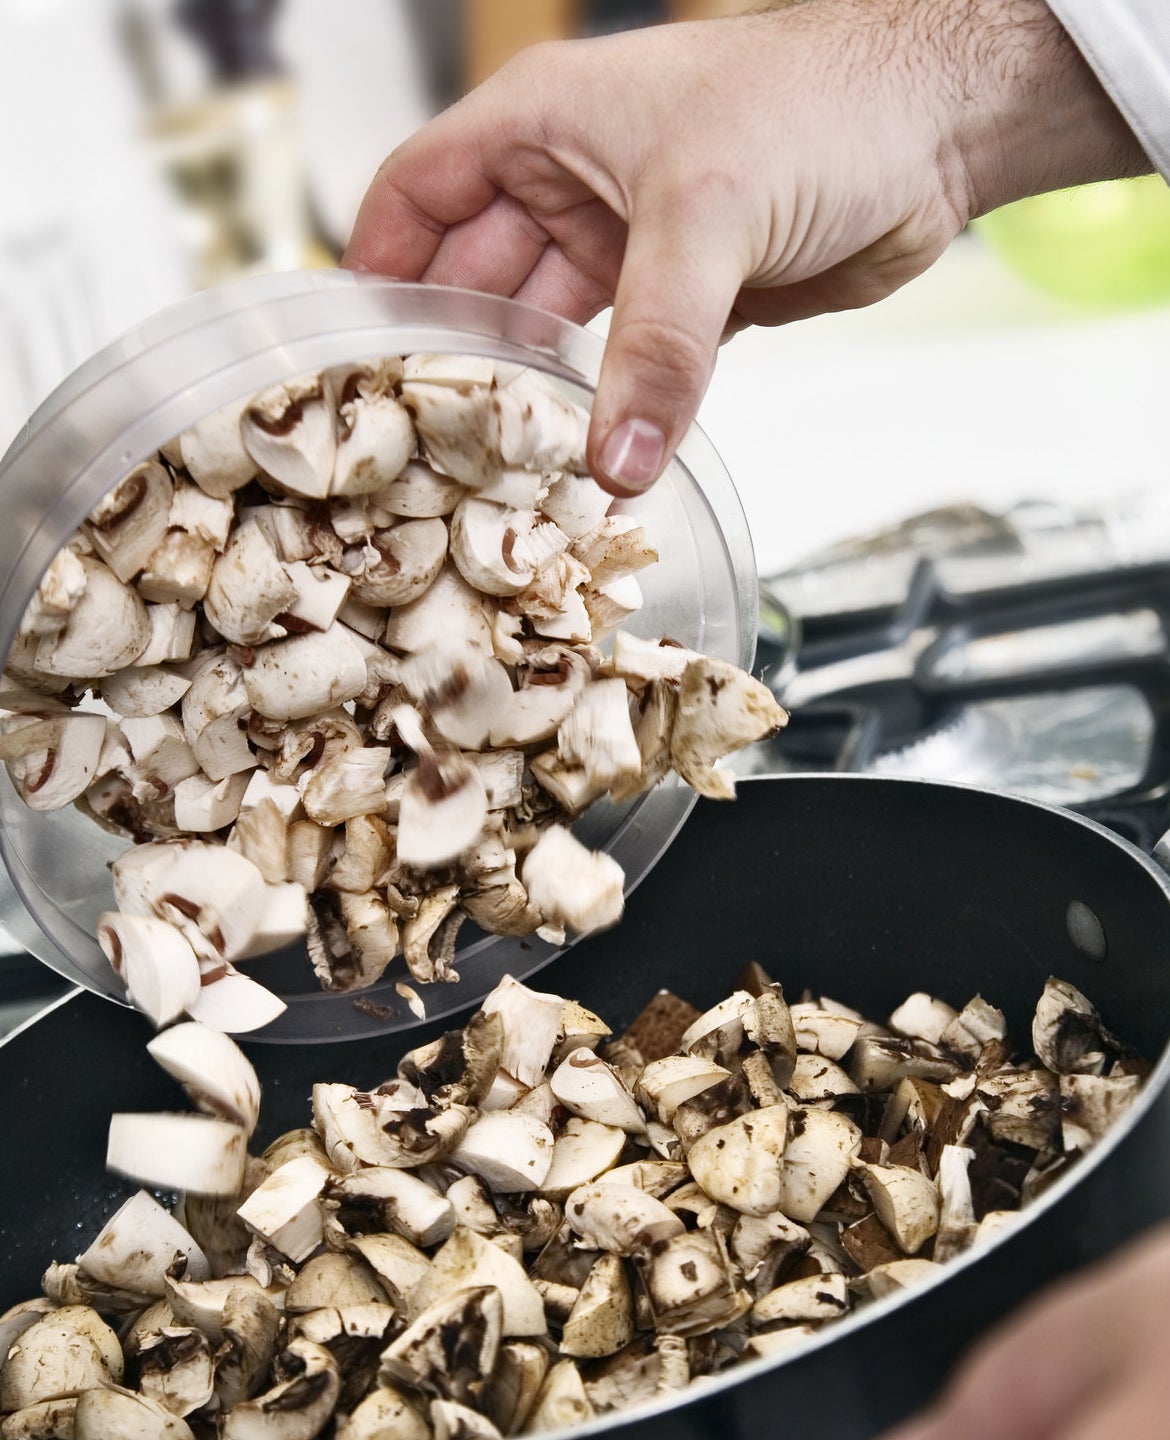 Mushrooms being poured into a pan.